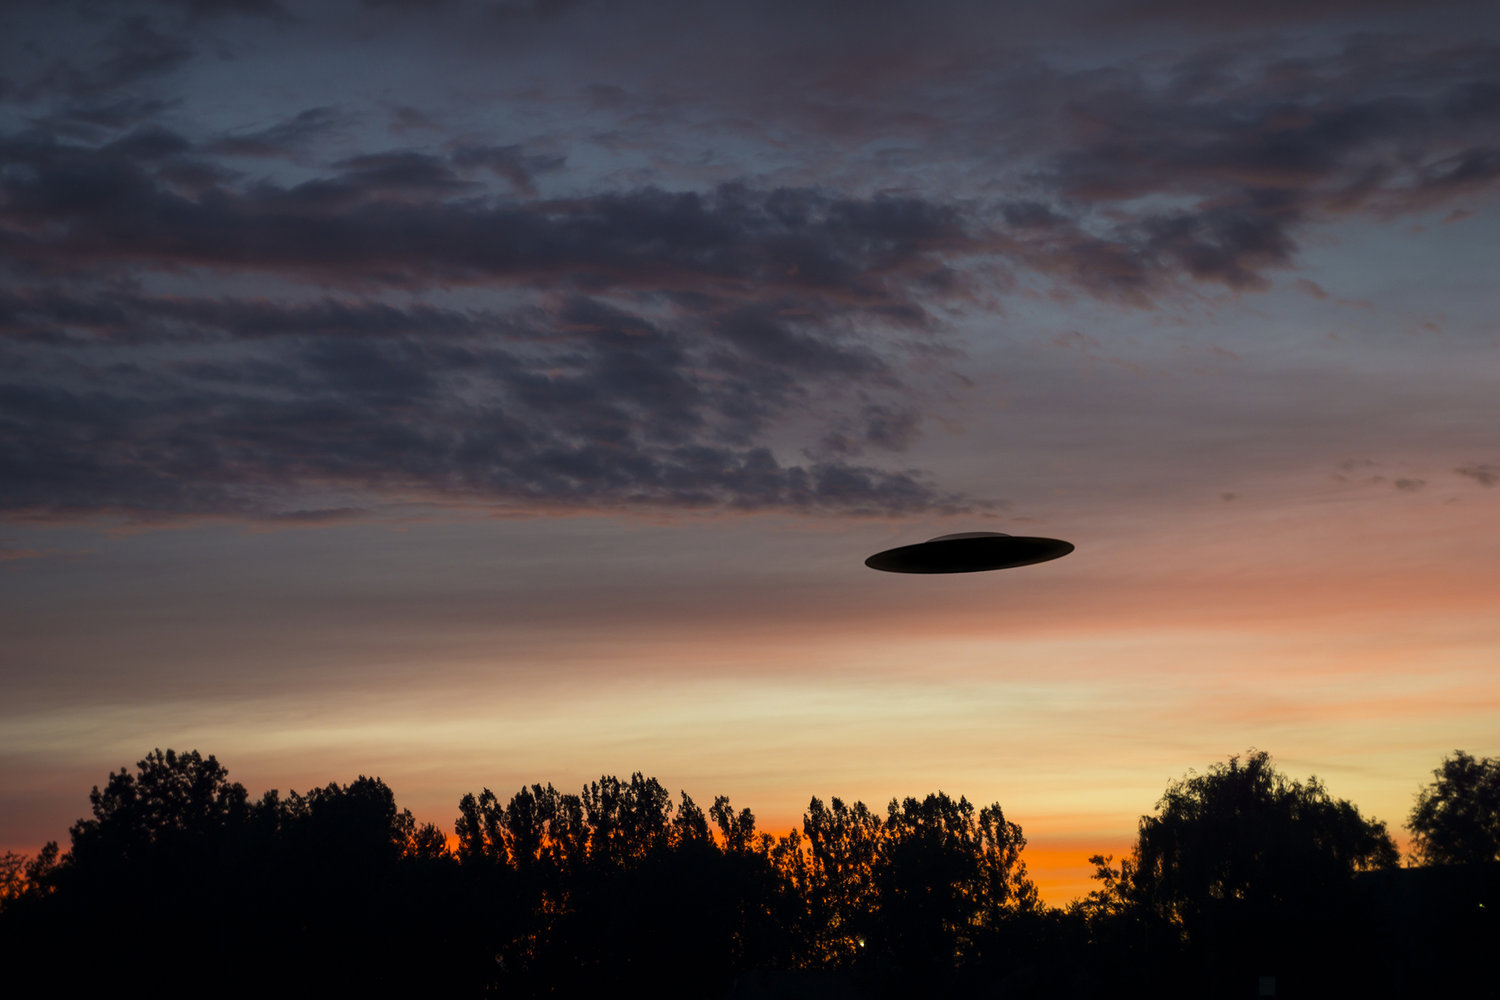 Seven-term lawmaker Rep.Andre Carson (D-Ind.) will oversee a public examination of unexplained aerial phenomena -- UFOs.  (Dreamstime/TNS)